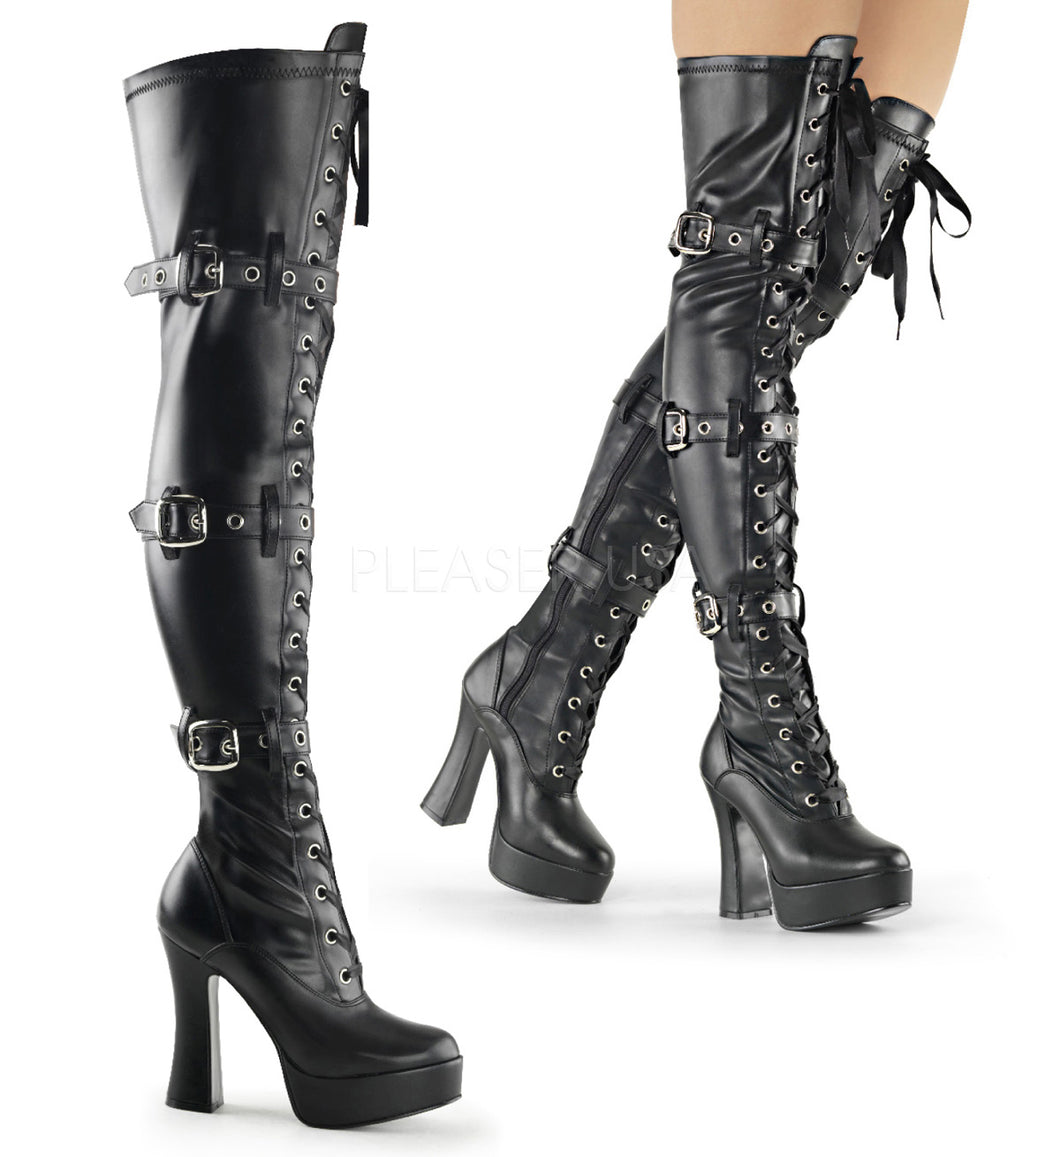 Electra 3028 - Gothic high heel thigh high boots